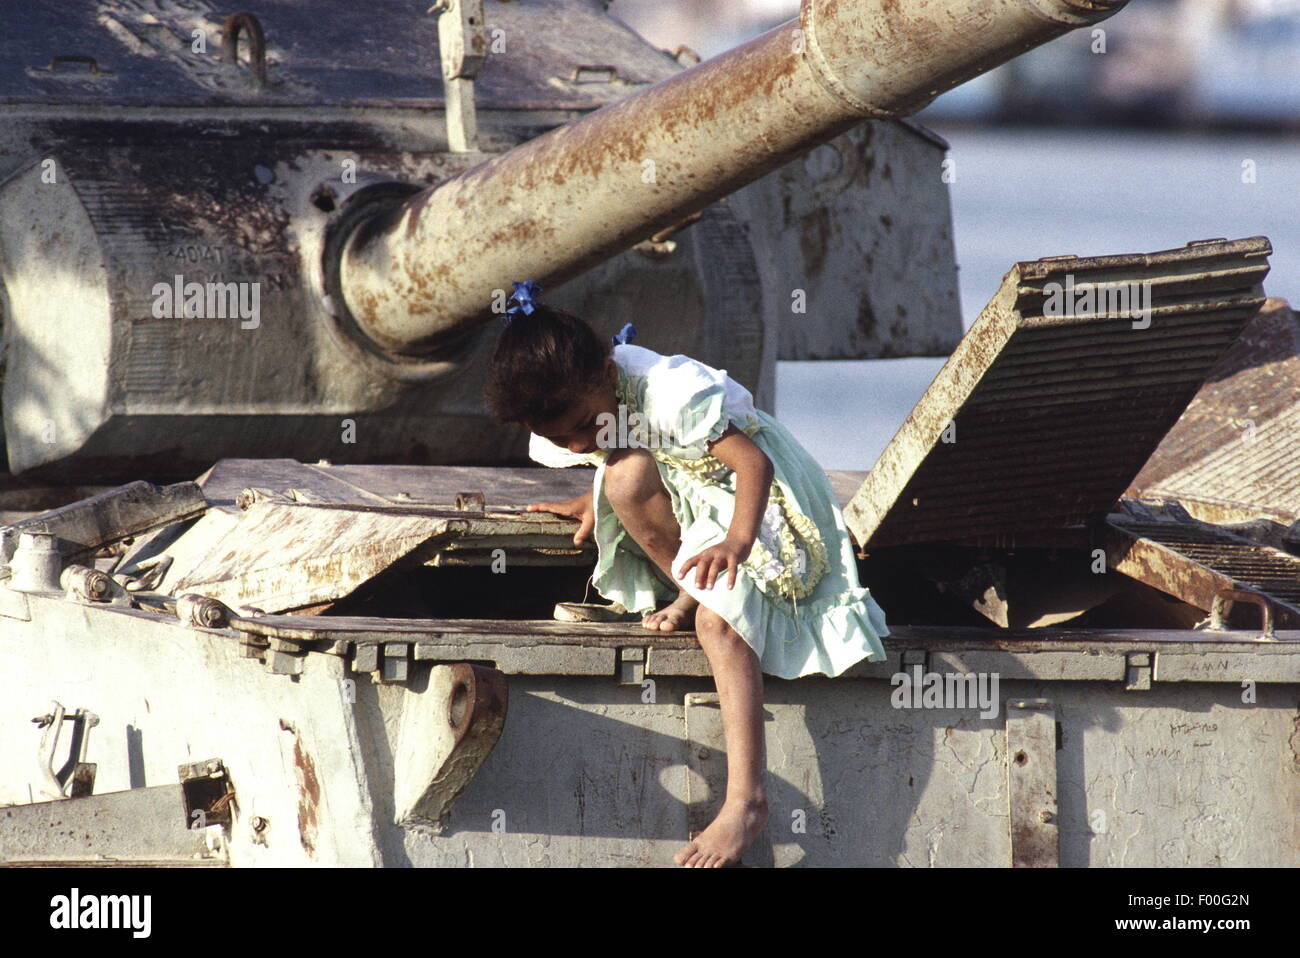 Suez Canal, Egypt - Egyptian children play on a ruined tank at the southern end of the Suez Canal, witness to wars past between Egypt and Israel. Stock Photo